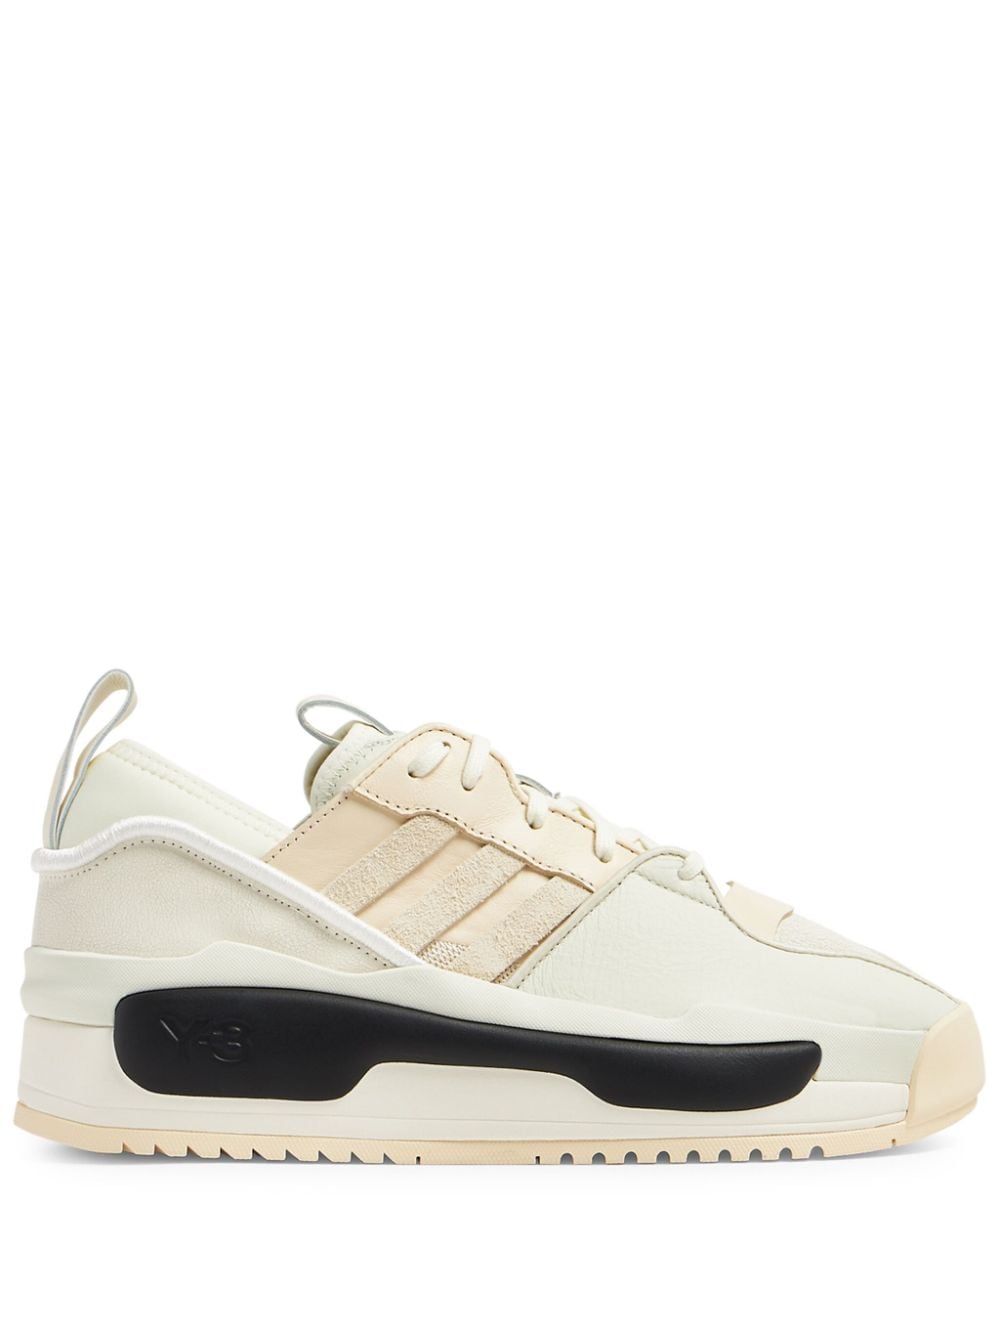 Shop Adidas Originals Rivalry Y-3 Leather Sneakers In White